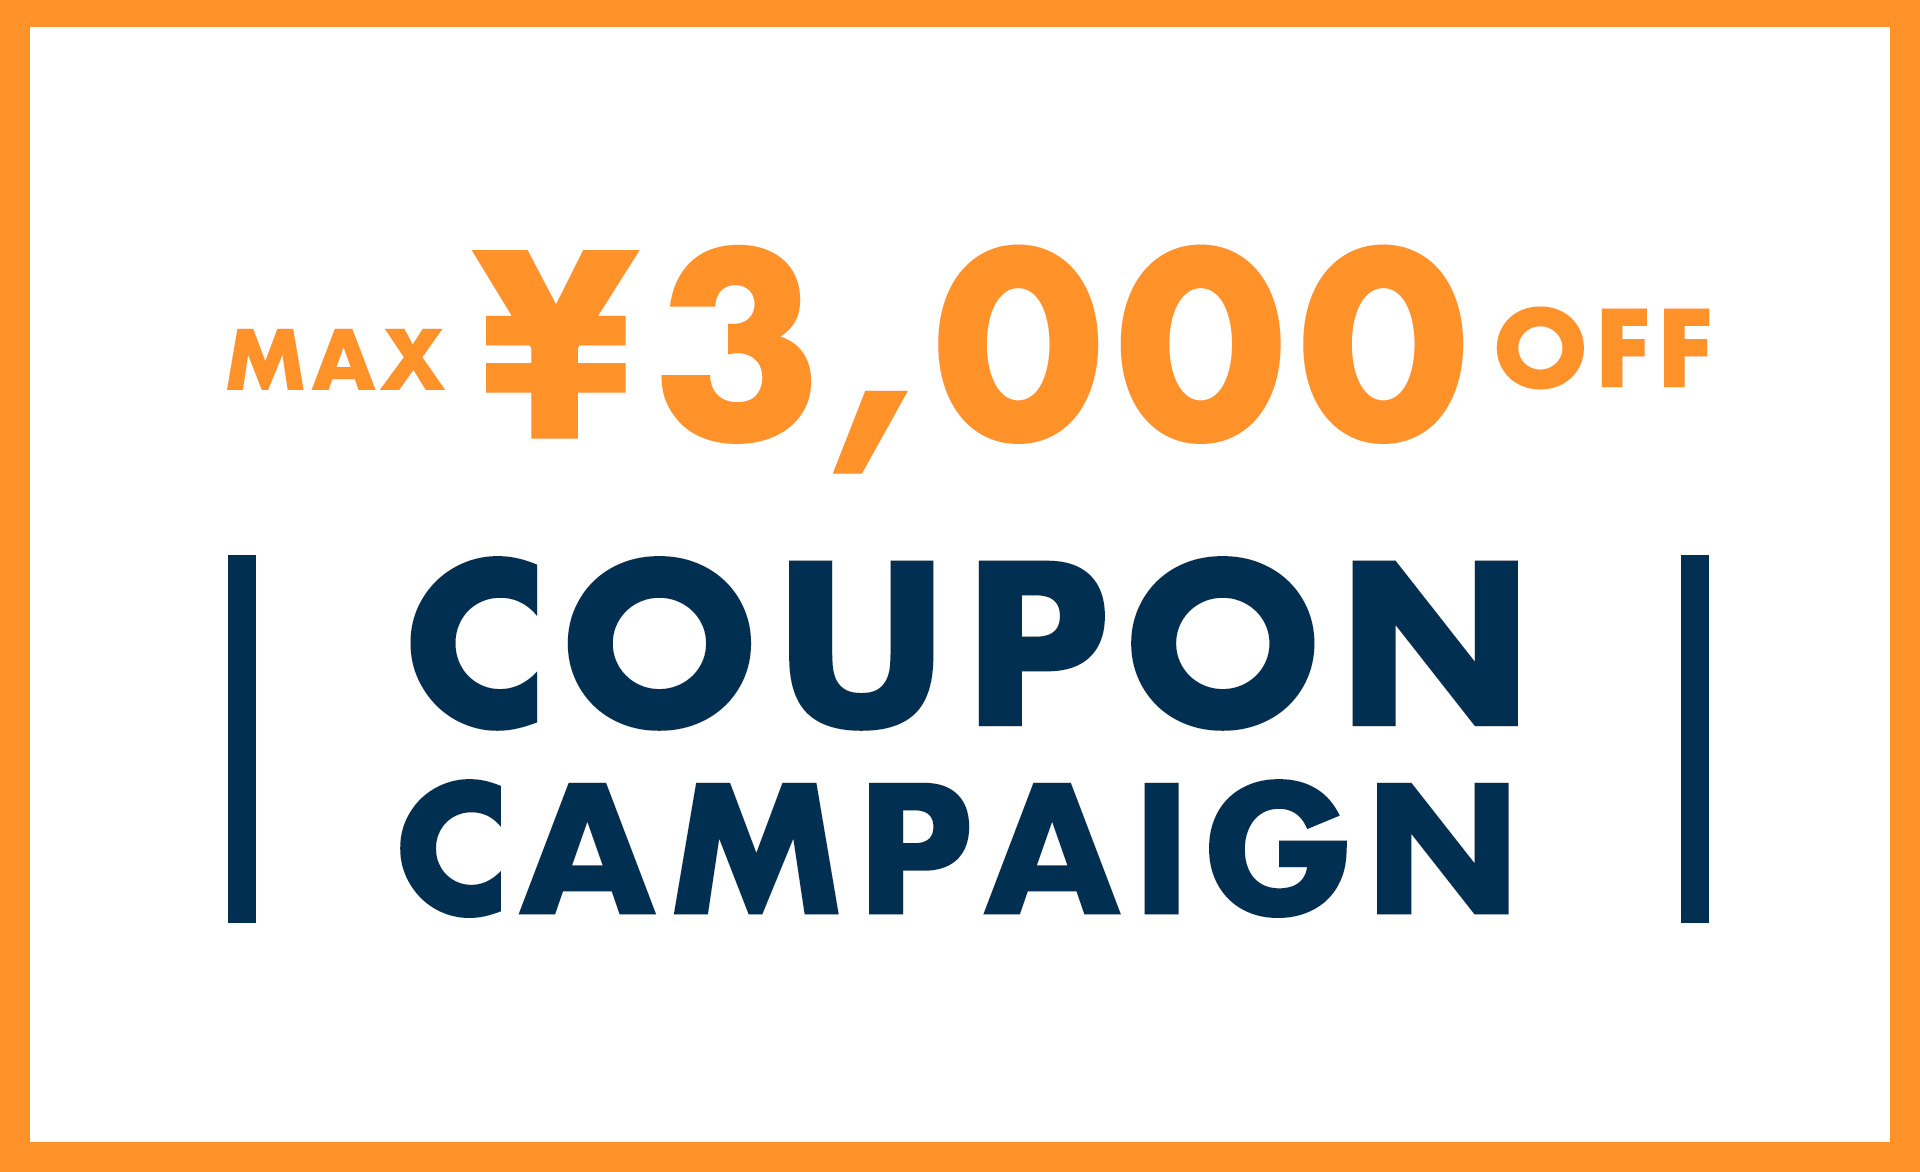 MAX￥3,000 OFF COUPON CAMPAIGN